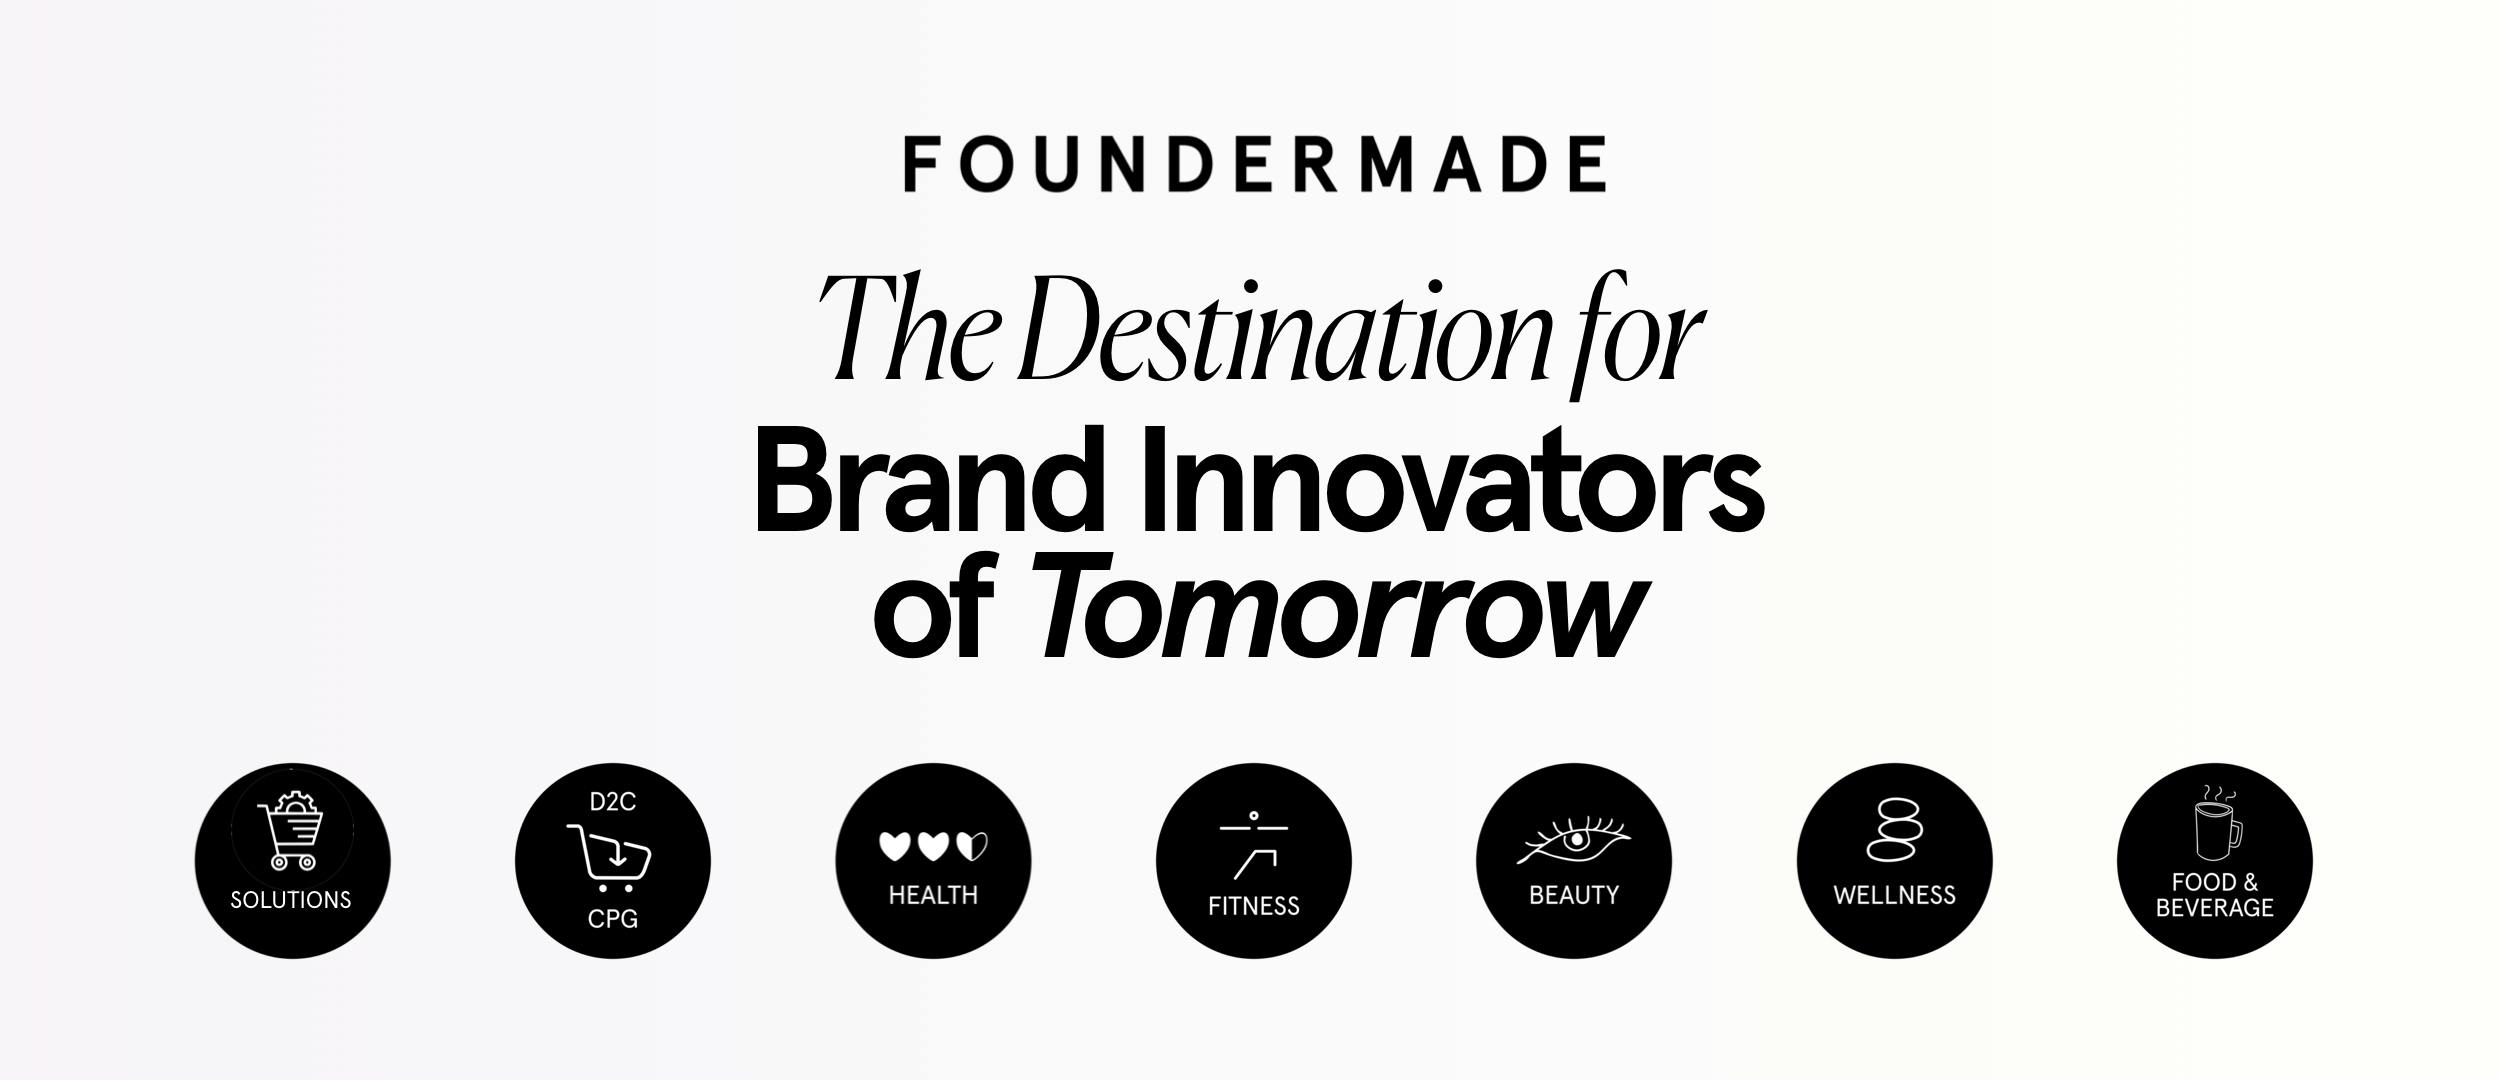 Foundermade: The destination for brand innovators of tomorrow